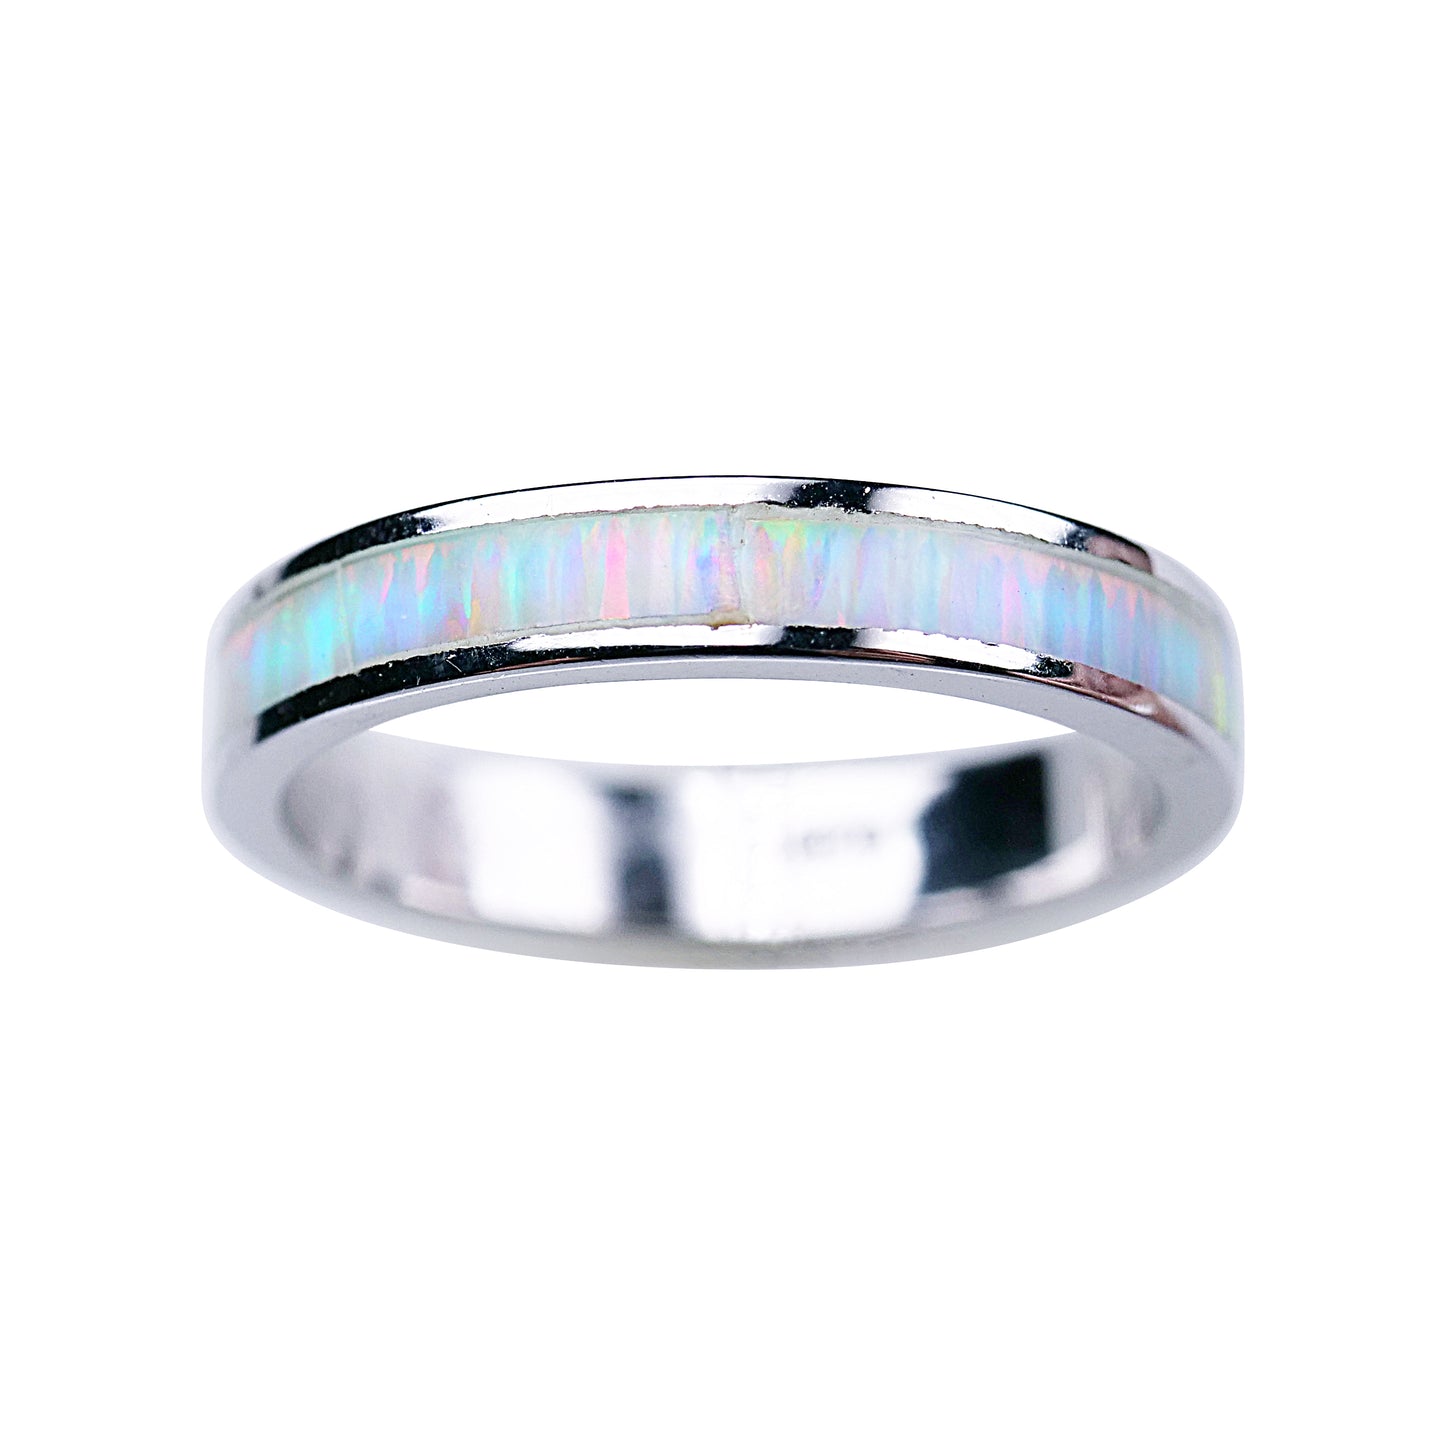 4mm White Opal Channel - Sterling Silver Thumb Ring - TH69-W SS